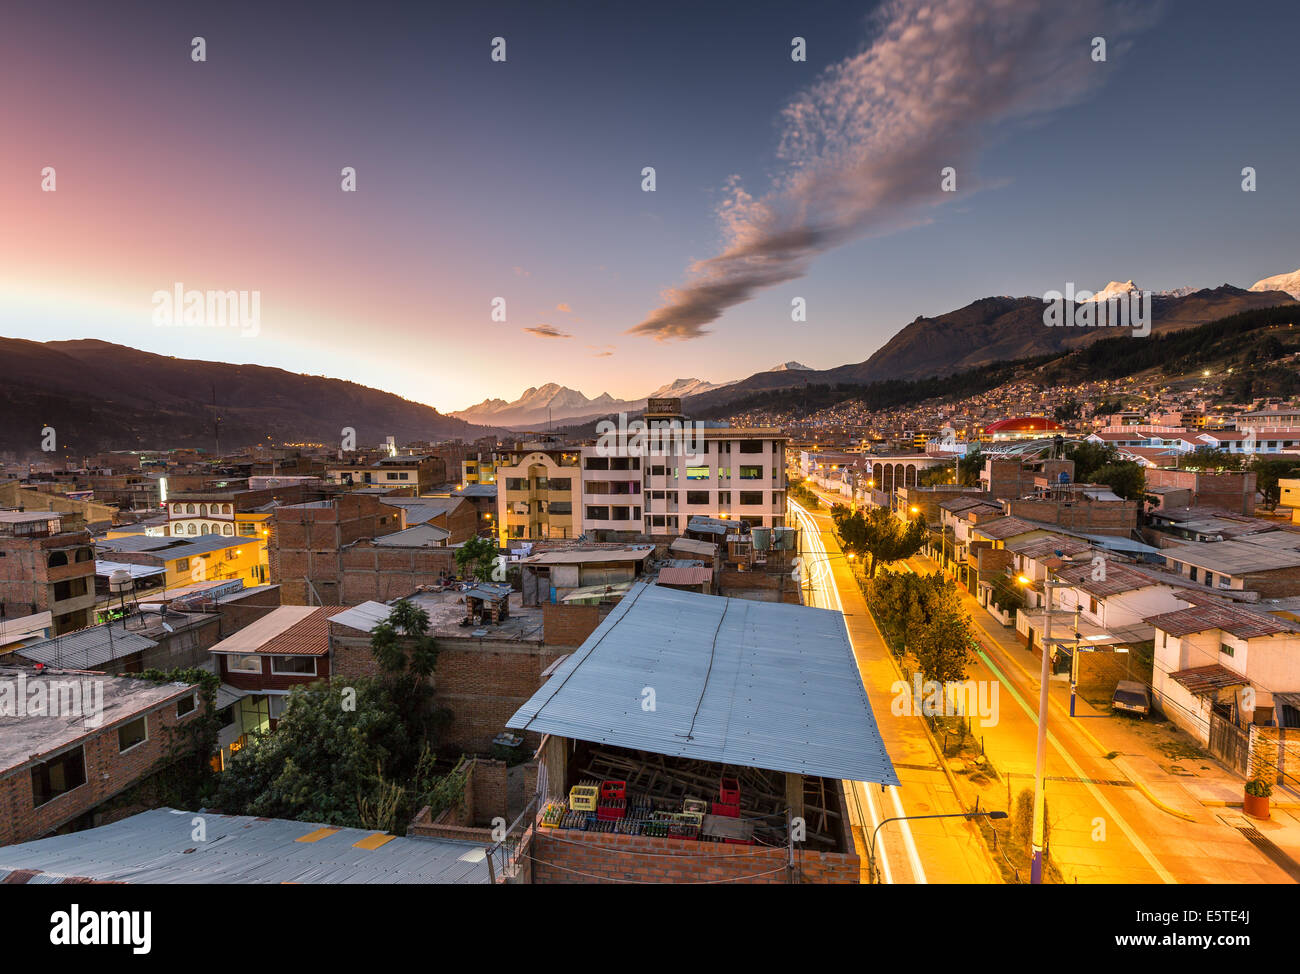 Am evening view over the city of Huaraz with the mountains of Cordillera Blanca in the background, Huaraz, Peru, South America Stock Photo